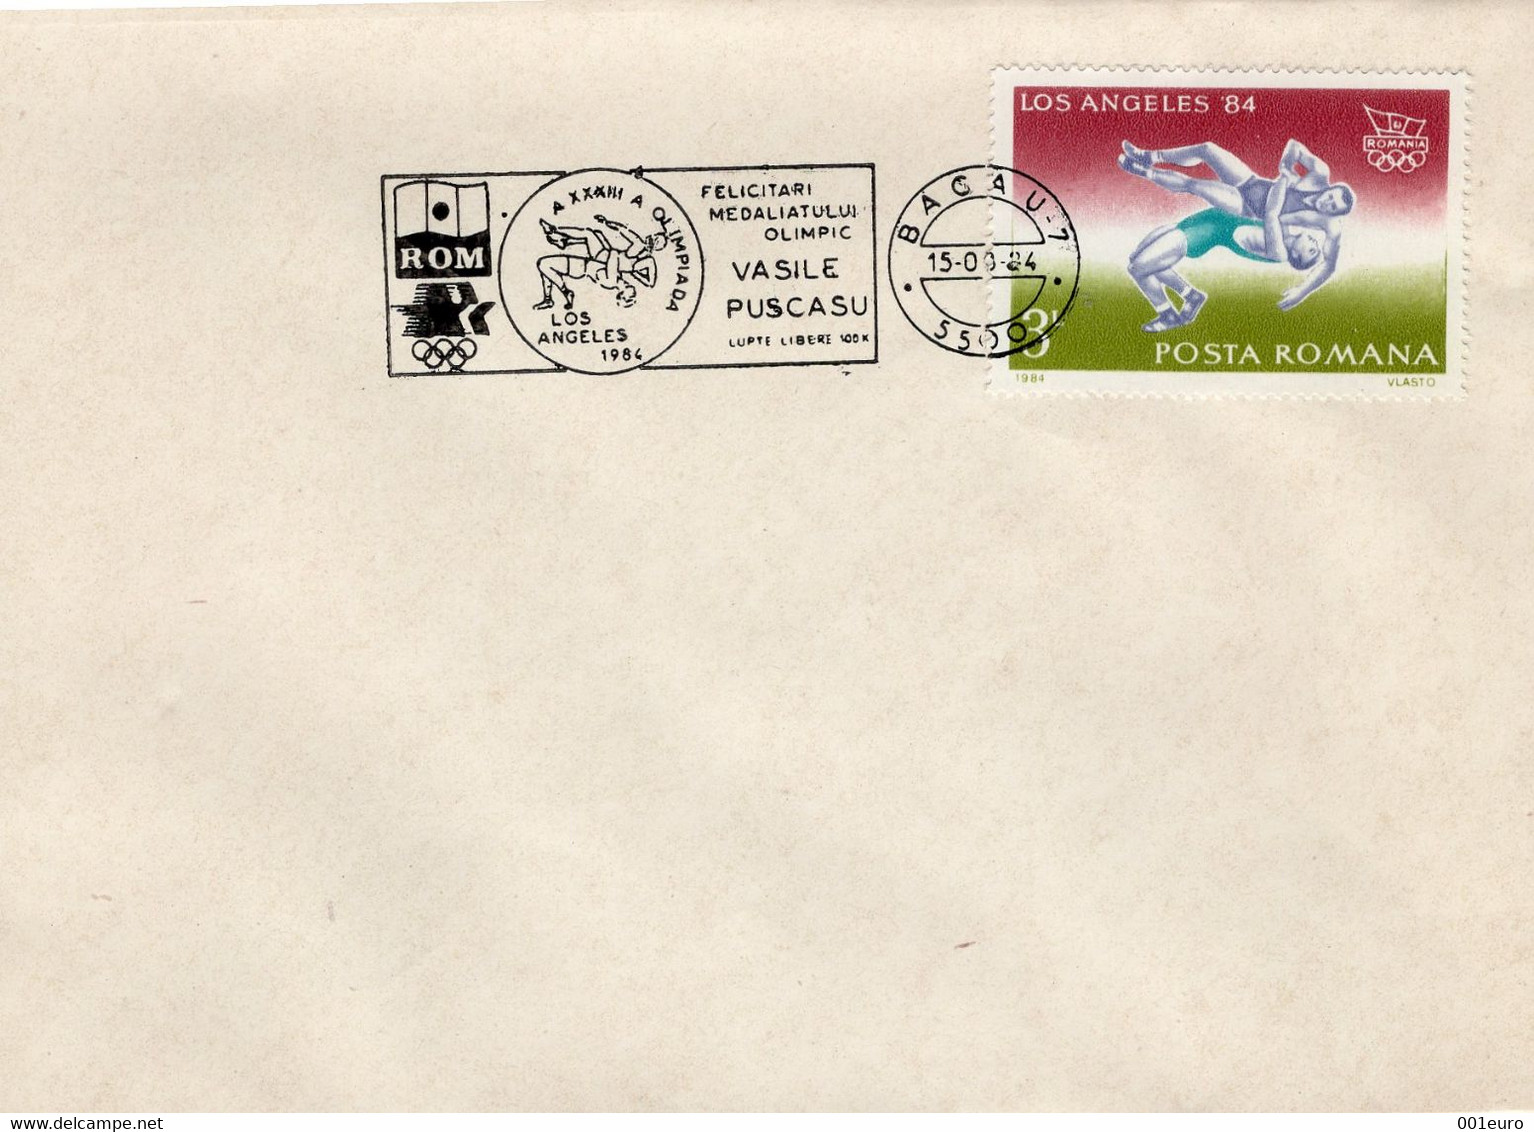 ROMANIA 1984: LOS ANGELES OLYMPIC MEDAL - WRESTLING, Illustrated Postmark On Cover  - Registered Shipping! - Marcofilie